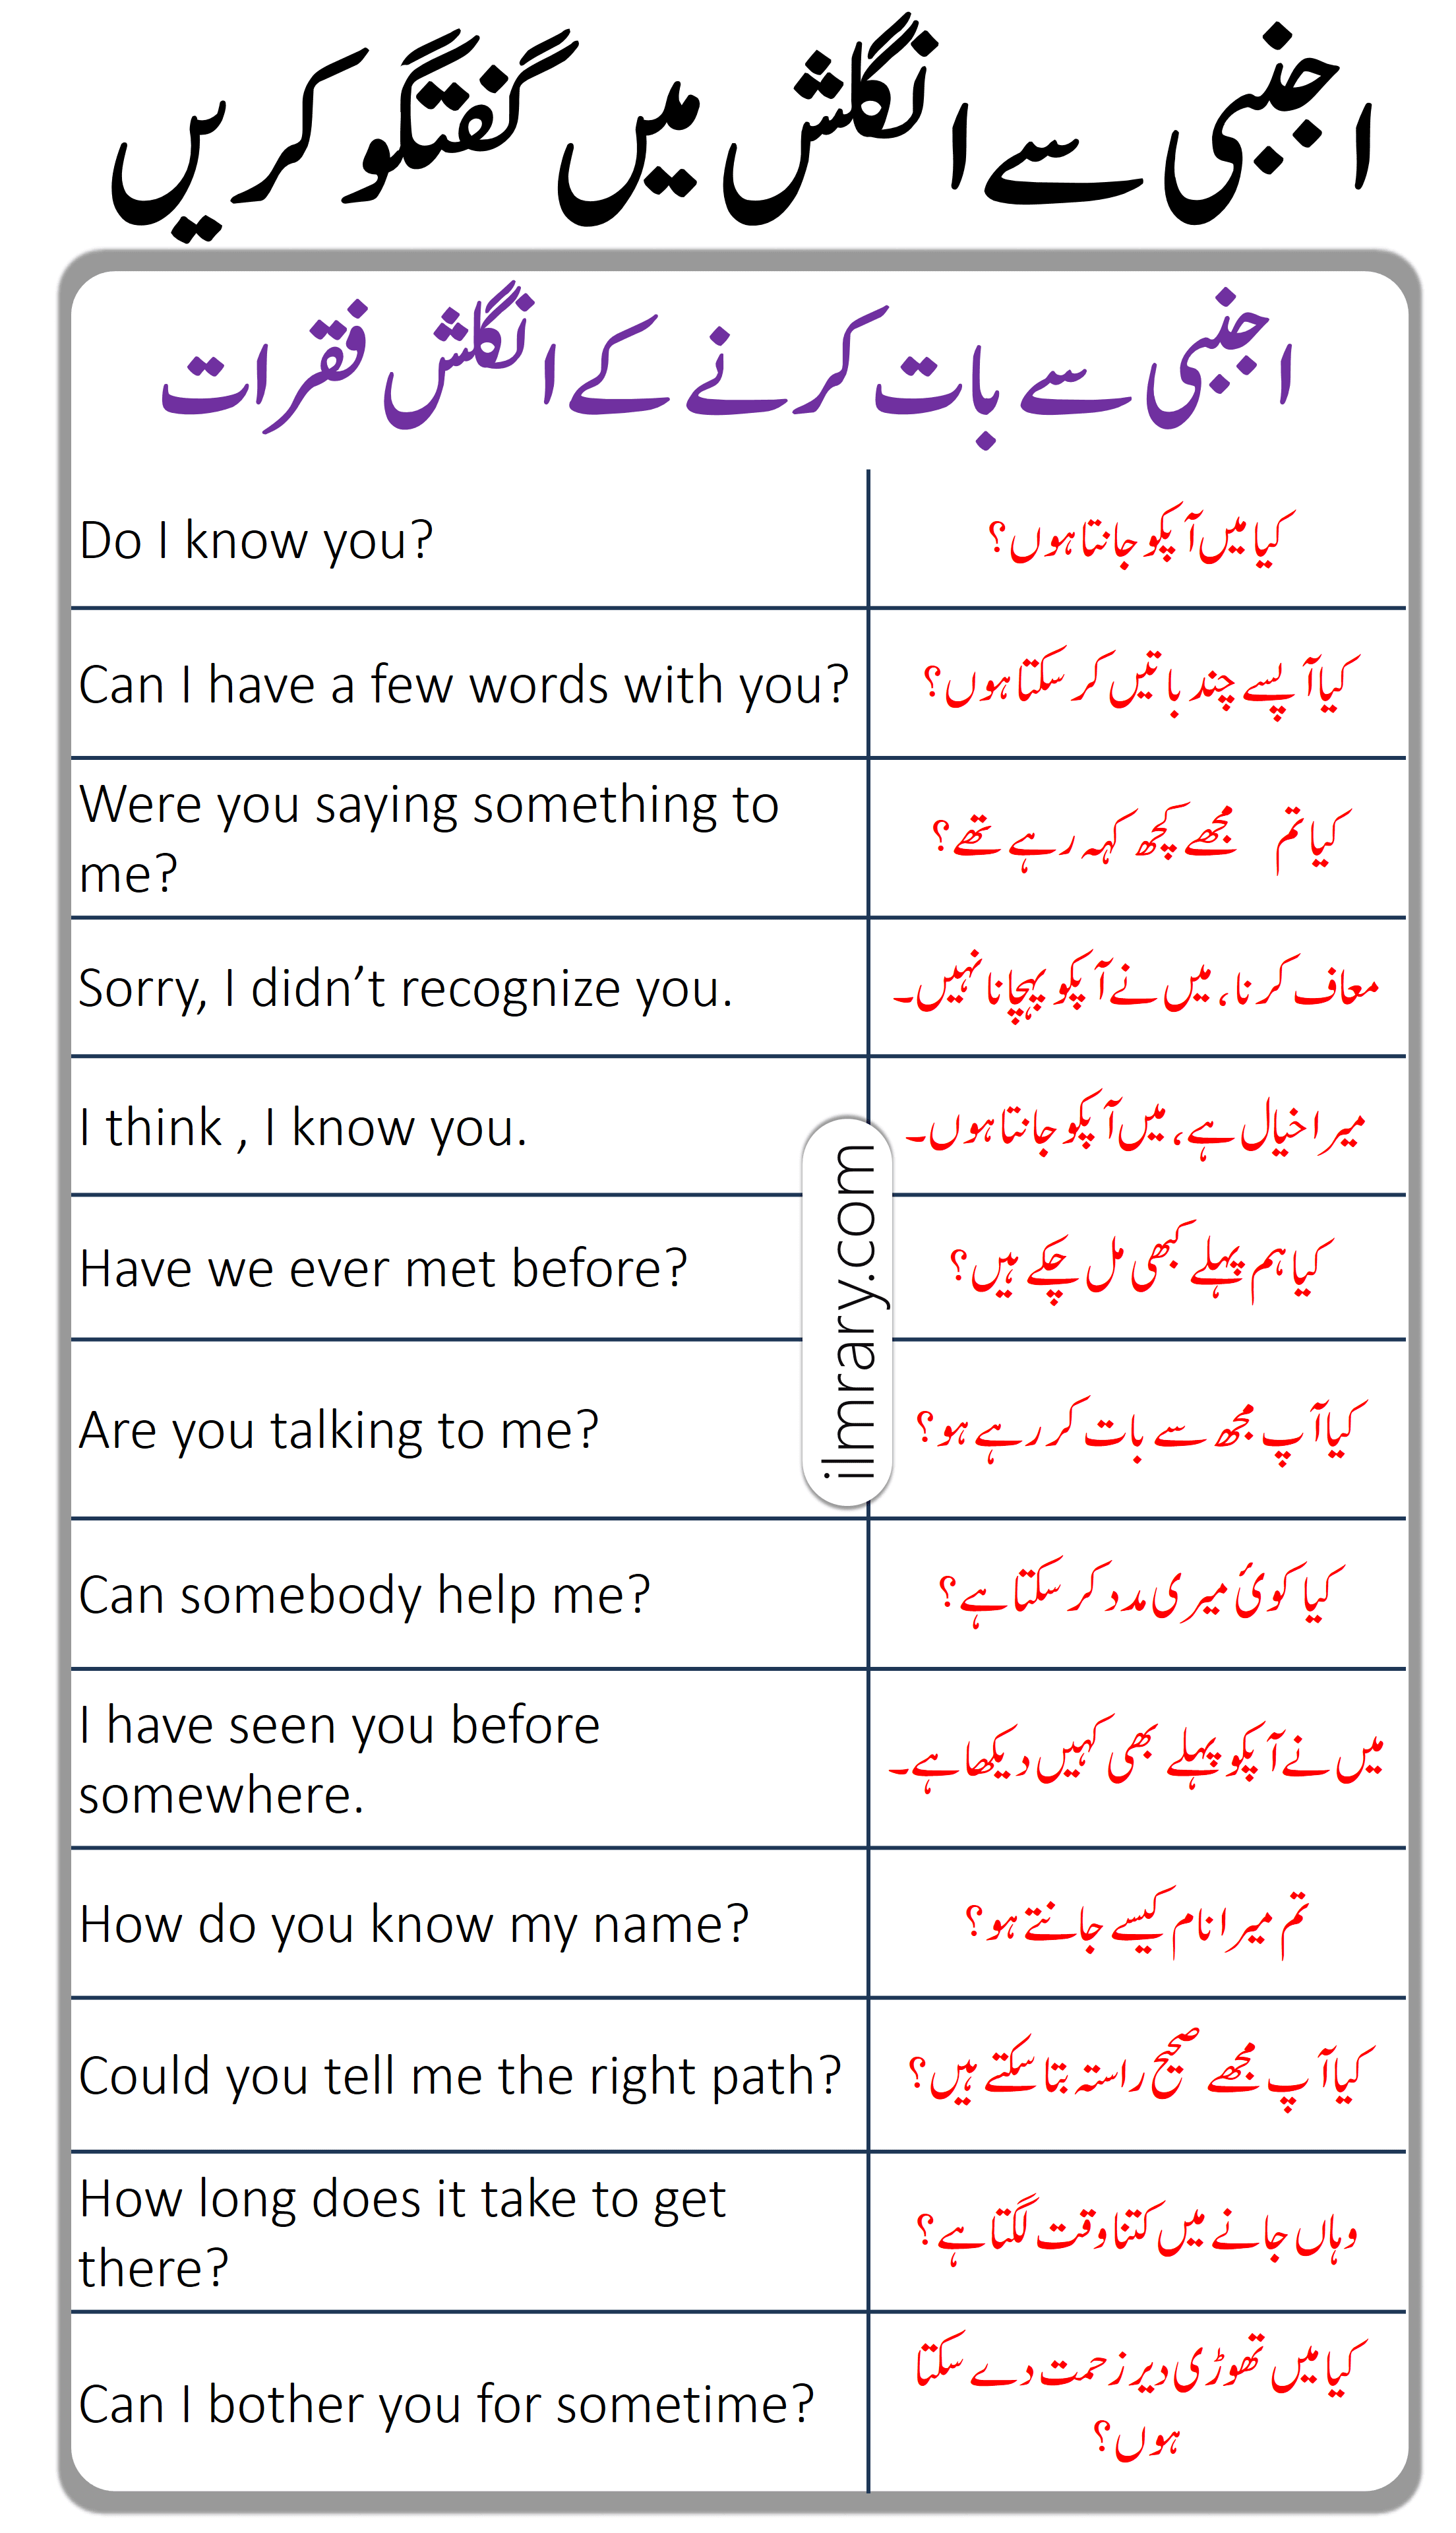 Daily Use English Sentences in Urdu to Talk with Strangers